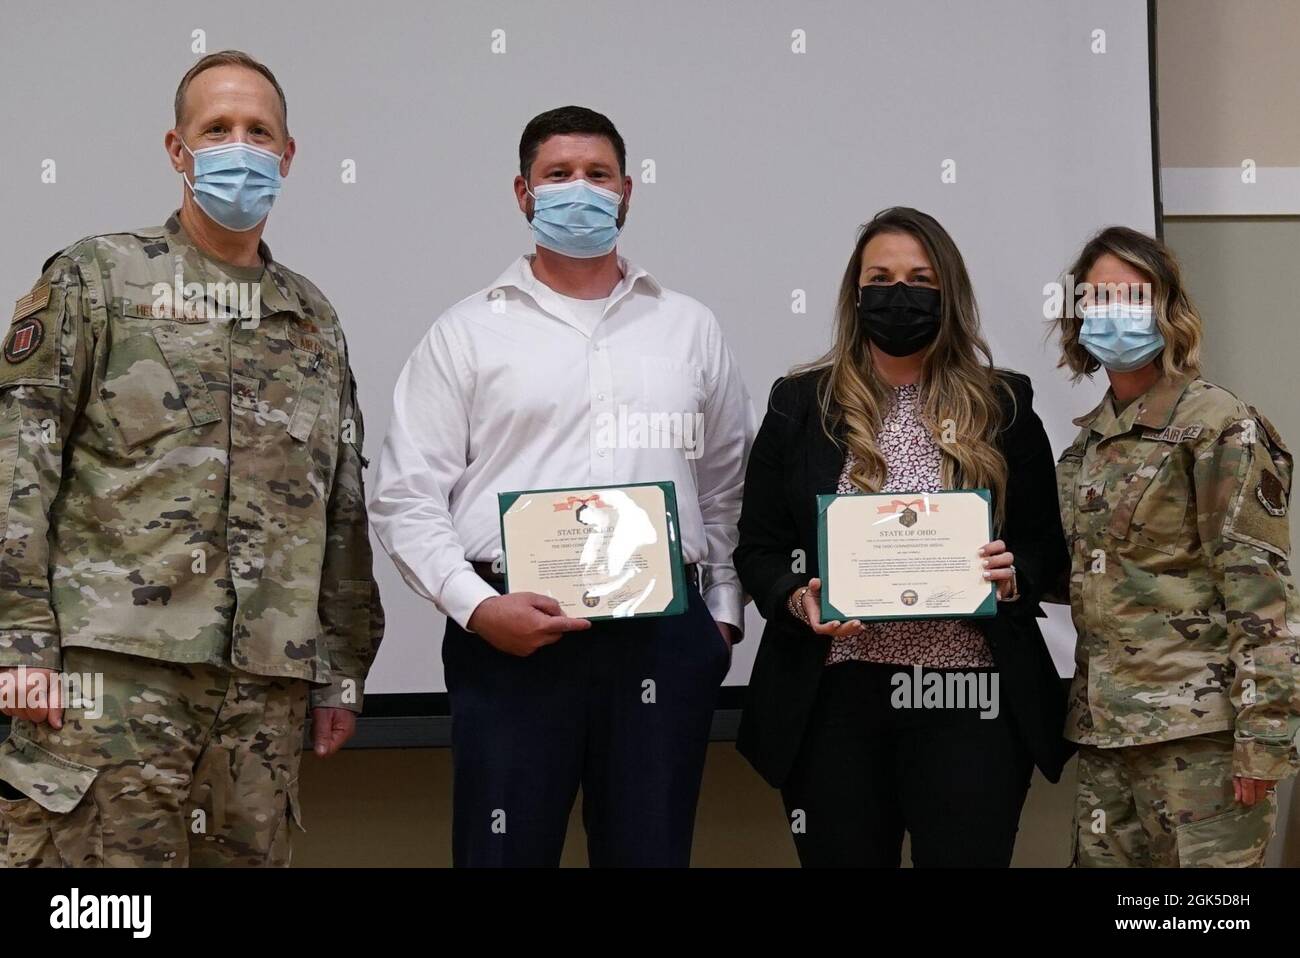 Col. Gregg Hesterman (left), commander of the joint task force that has provided oversight of Ohio National Guard COVID-19 support missions, and Maj. Shelley Brackman (right), of the 121st Medical Group, stand for a photo with Ricky Hoover (second from left) of the Ohio Department of Health and Erin Farrell of The Ohio State University Wexner Medical Center Aug. 6, 2021, at the 147th Regiment (Regional Training Institute) on the Defense Supply Center Columbus campus in Columbus, Ohio. Hoover and Farrell were awarded Ohio Commendation Medals for their outstanding partnerships with the Ohio Nati Stock Photo